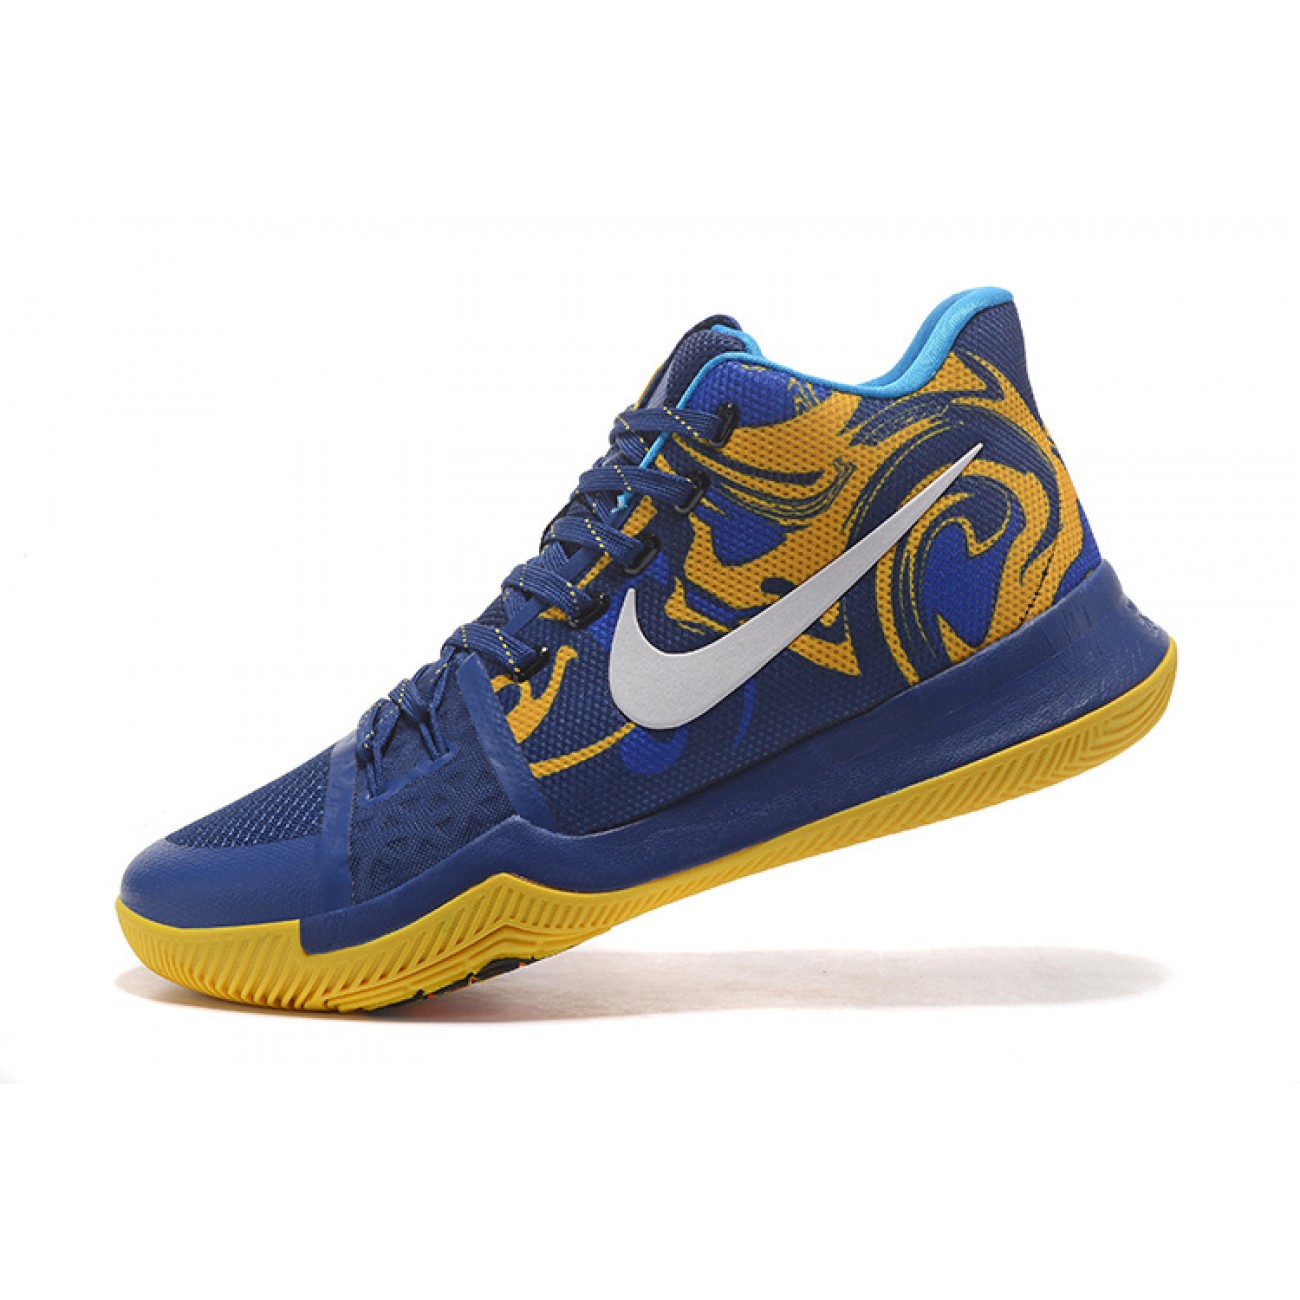 Kyrie 3 "Five Champion" Blue/Yellow